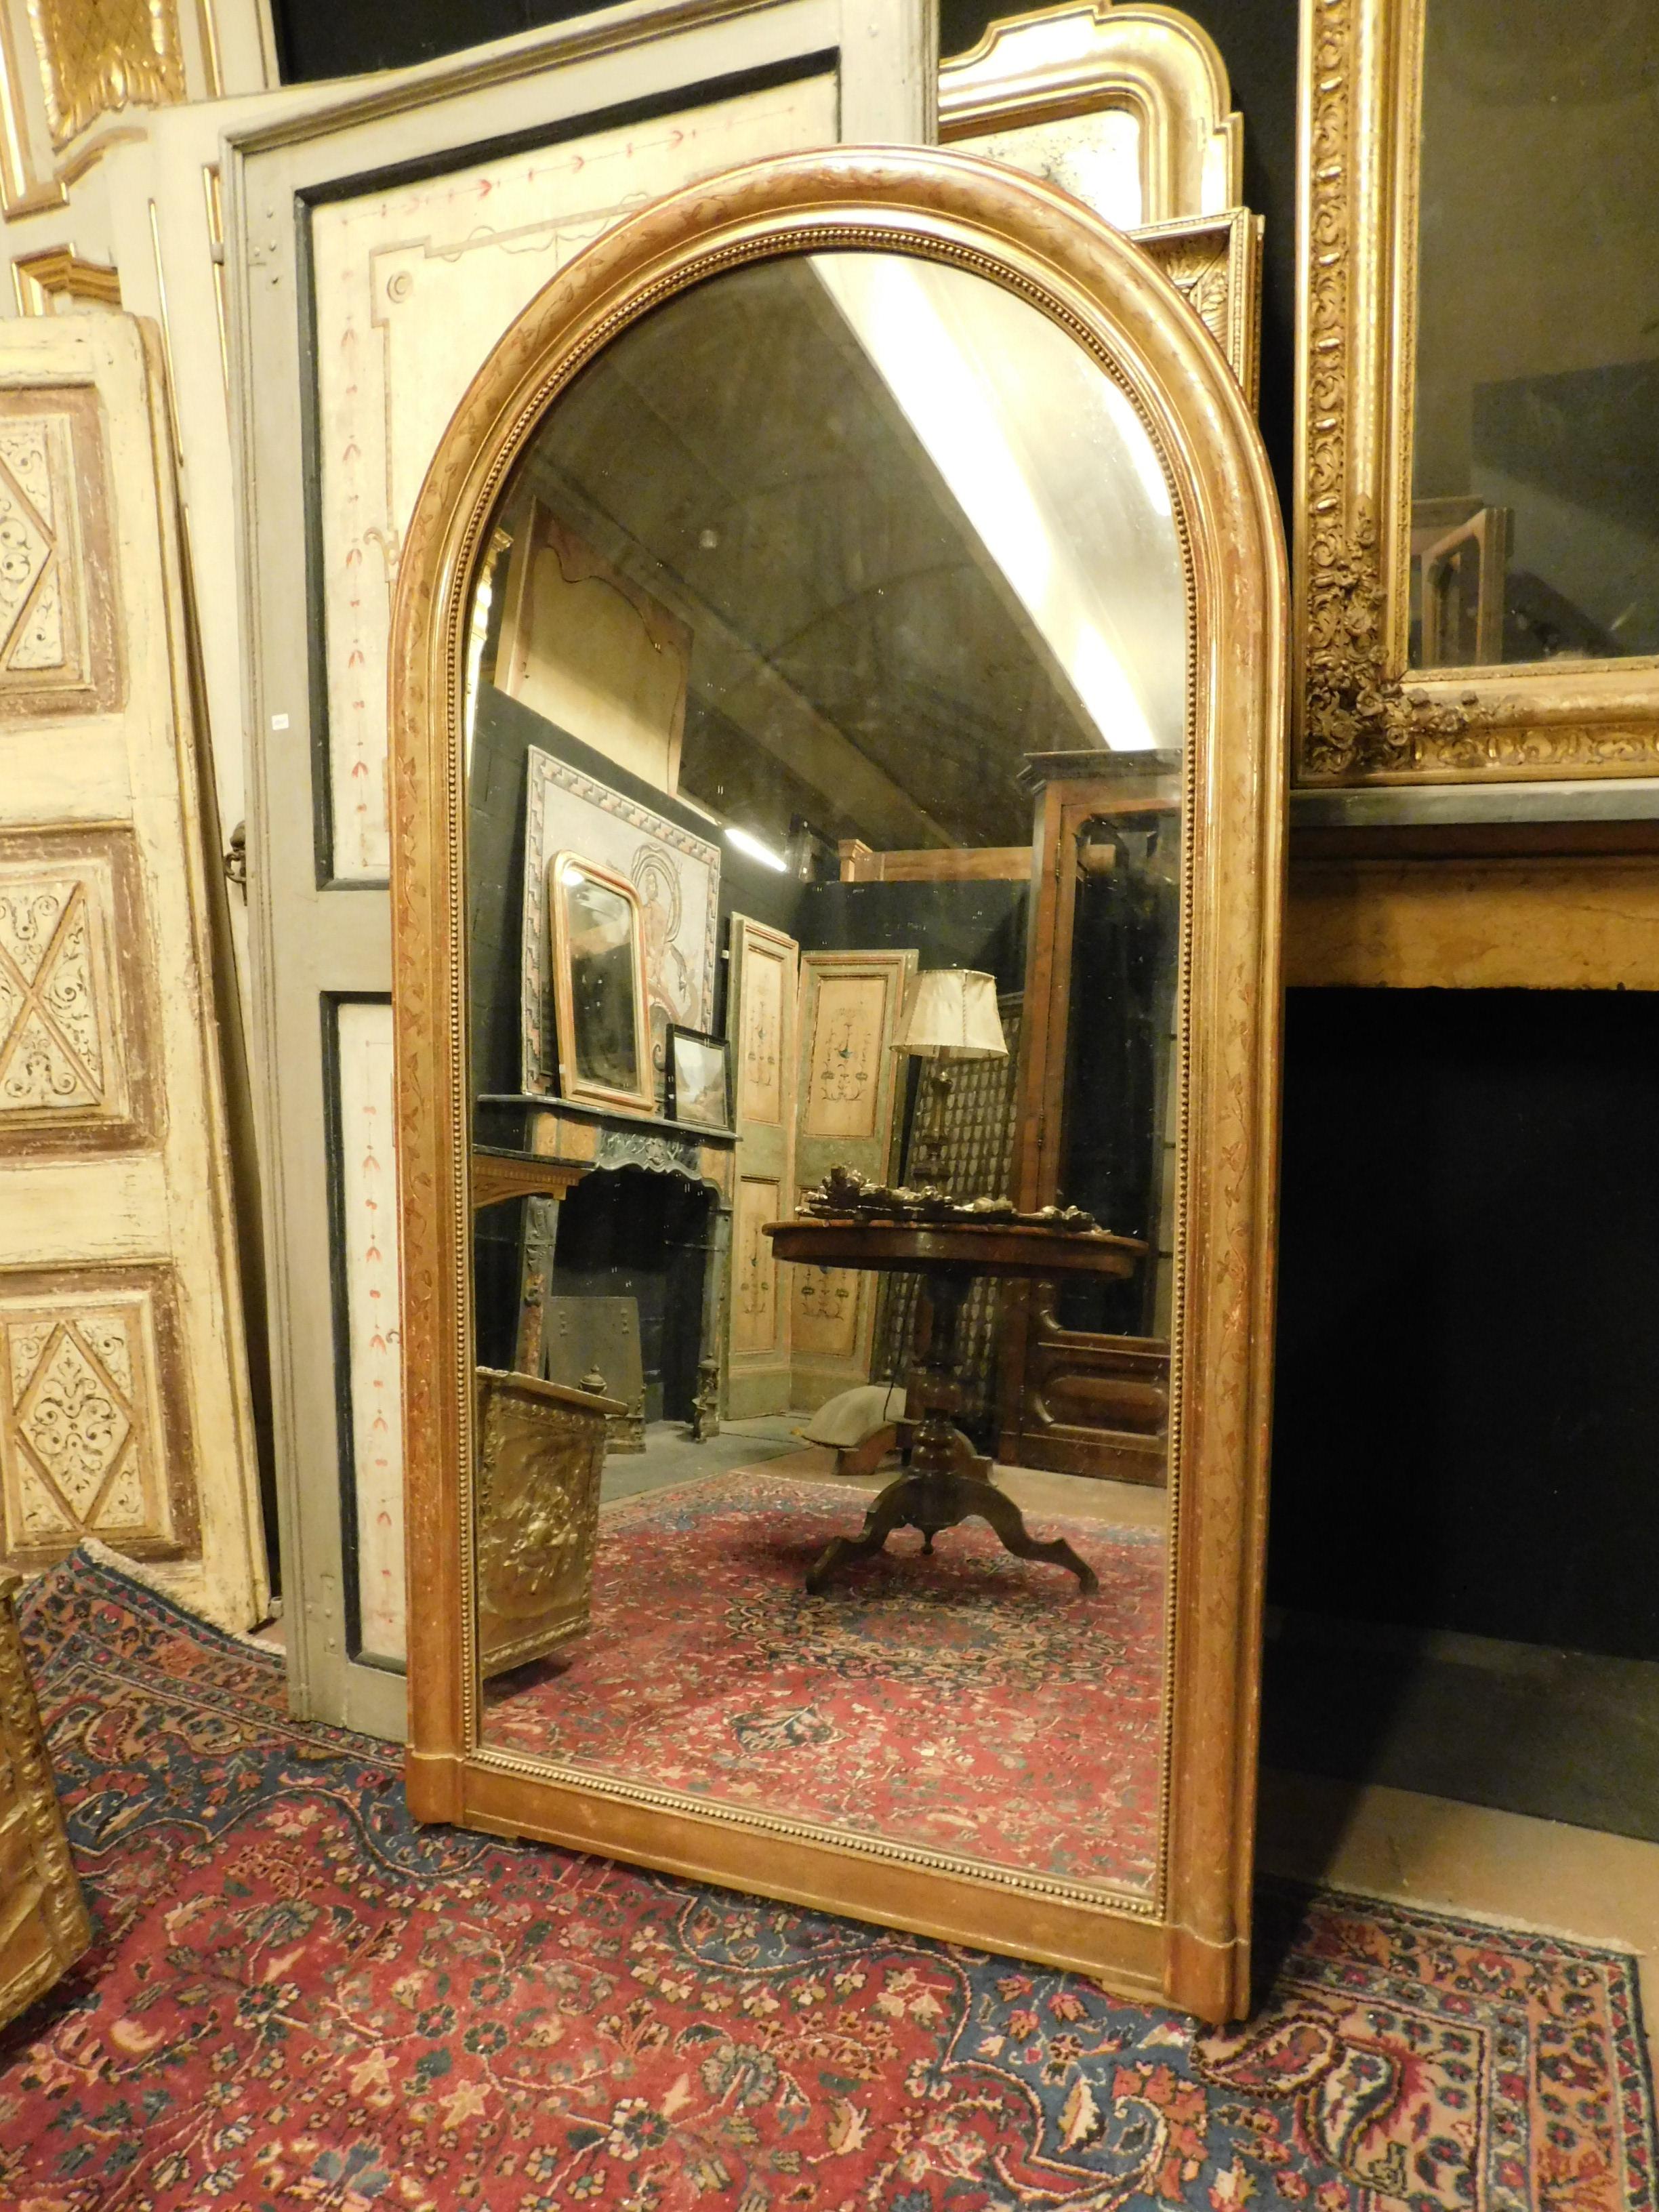 Ancient arched wooden mirror with gilded frame and bas-relief carved on the frame, built in the 19th century in Italy.
Possible to use as a door leaf, or as a floor mirror in an entrance hall, with high ceilings it is also possible to place it